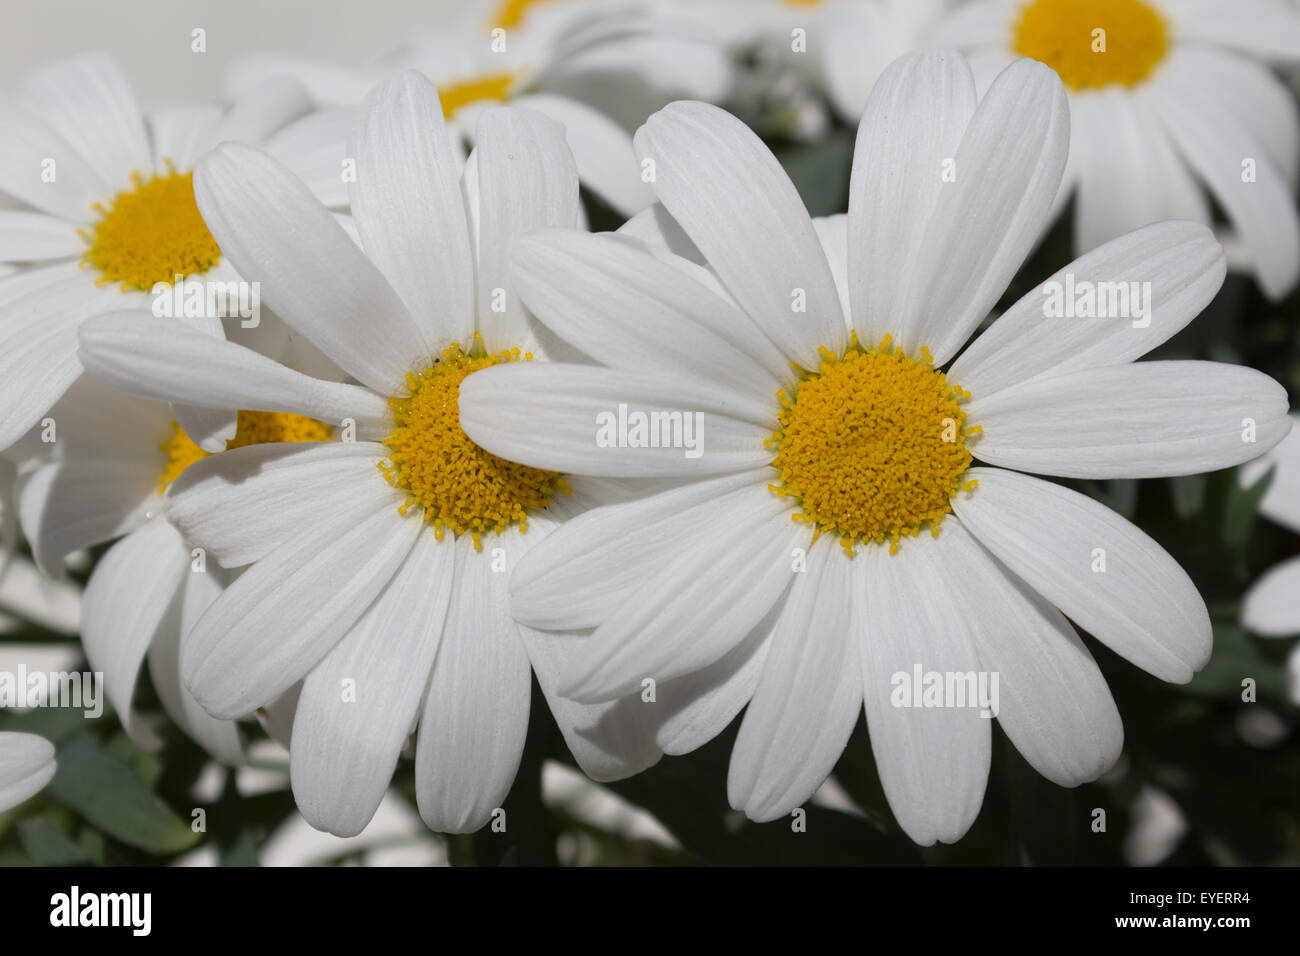 daisy flowers close up - daisies white flowers / chamomile Stock Photo